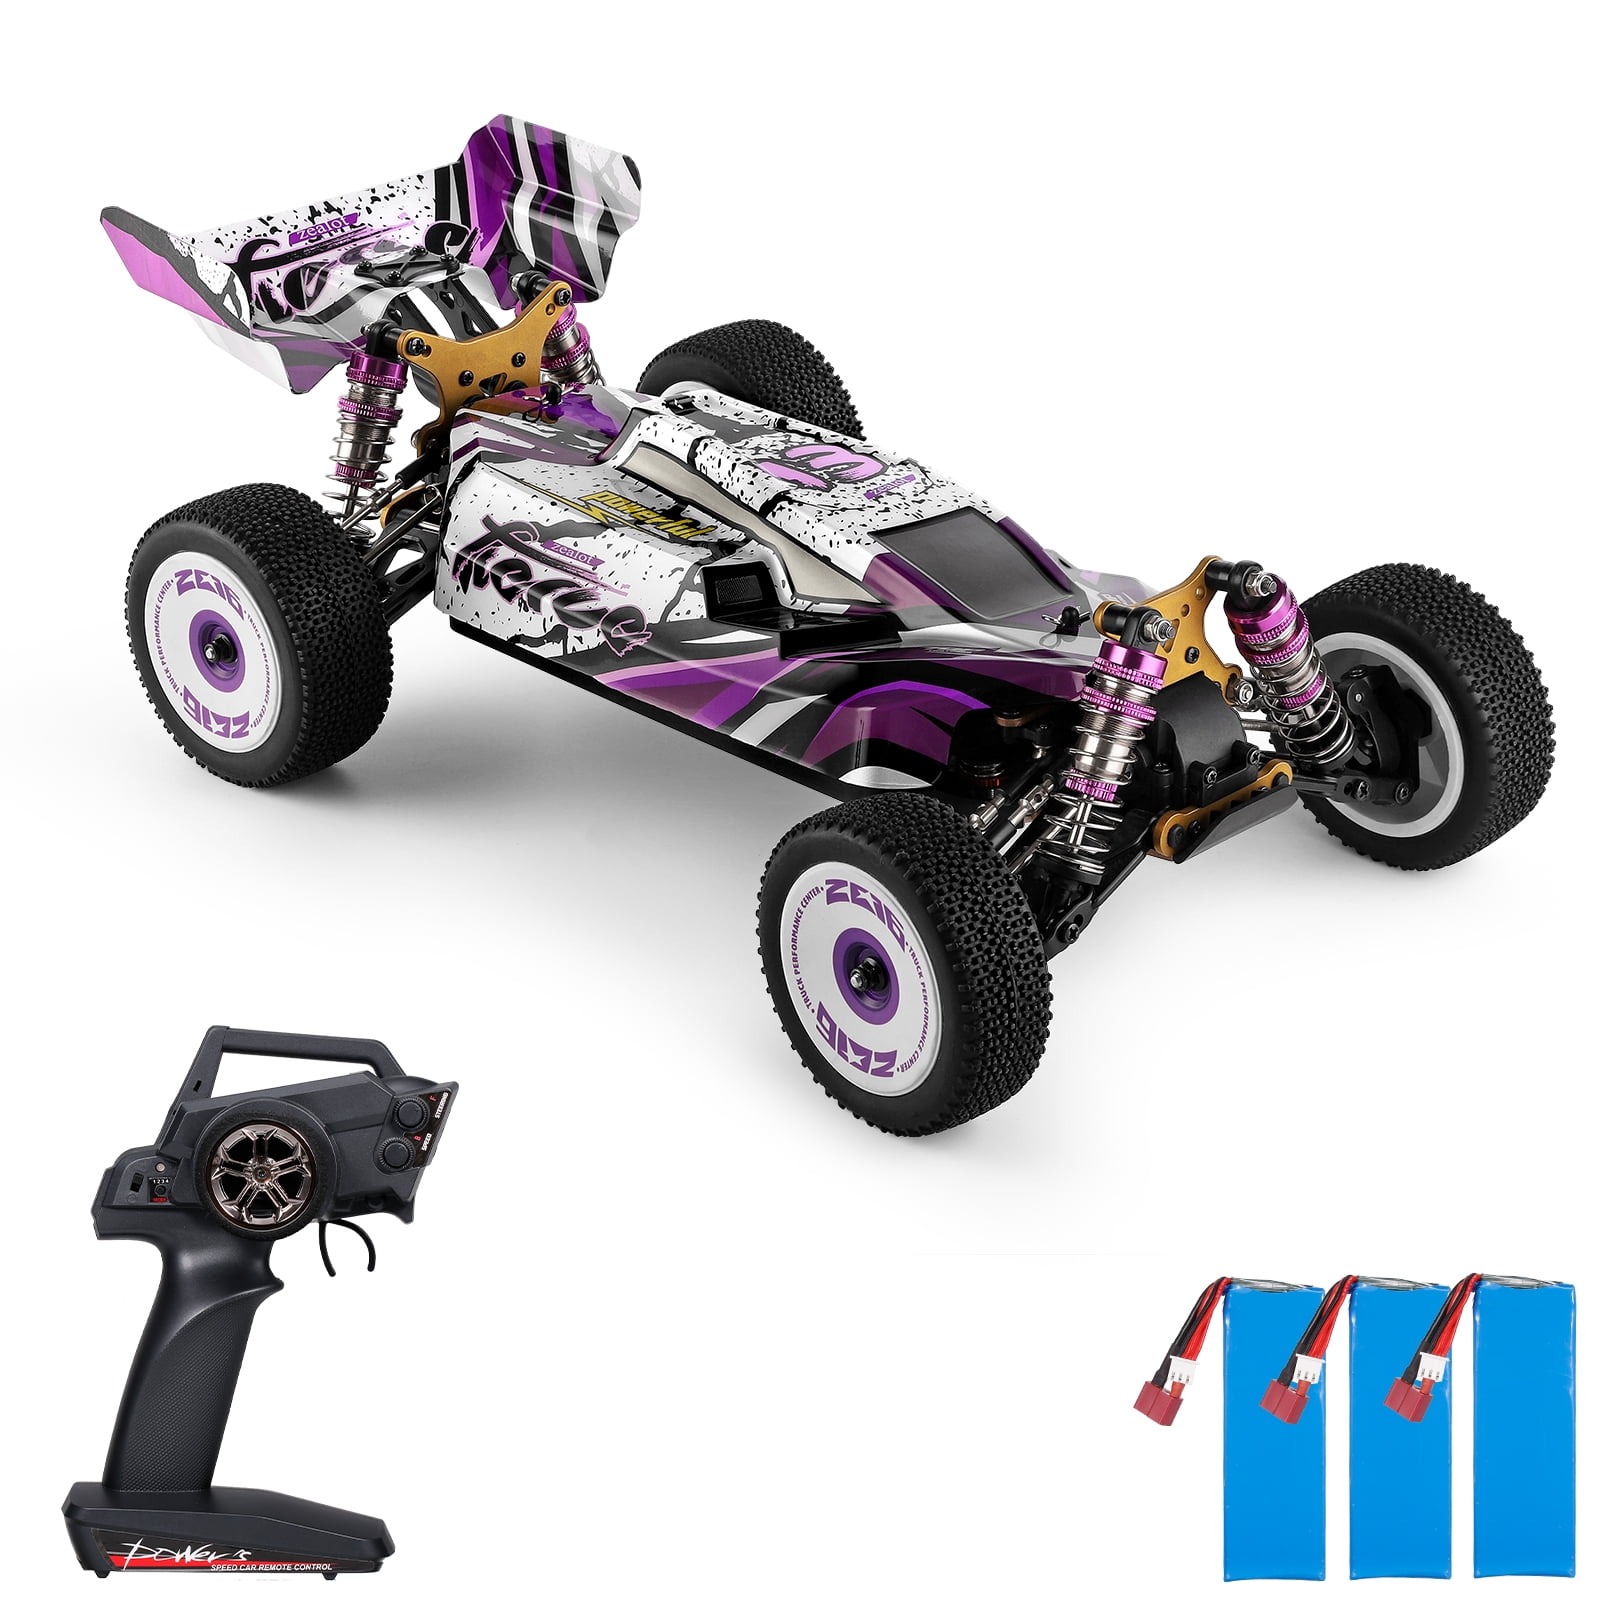 4WD 45km/h High Speed Racing Car 1:10 Scale 2.4GHz Remote Control Car GoolRC WLtoys 104001 RC Car Drift Car with Aluminum Alloy Chassis Zinc Alloy Gear and 3 Batteries All Terrain Off-Road Buggy 